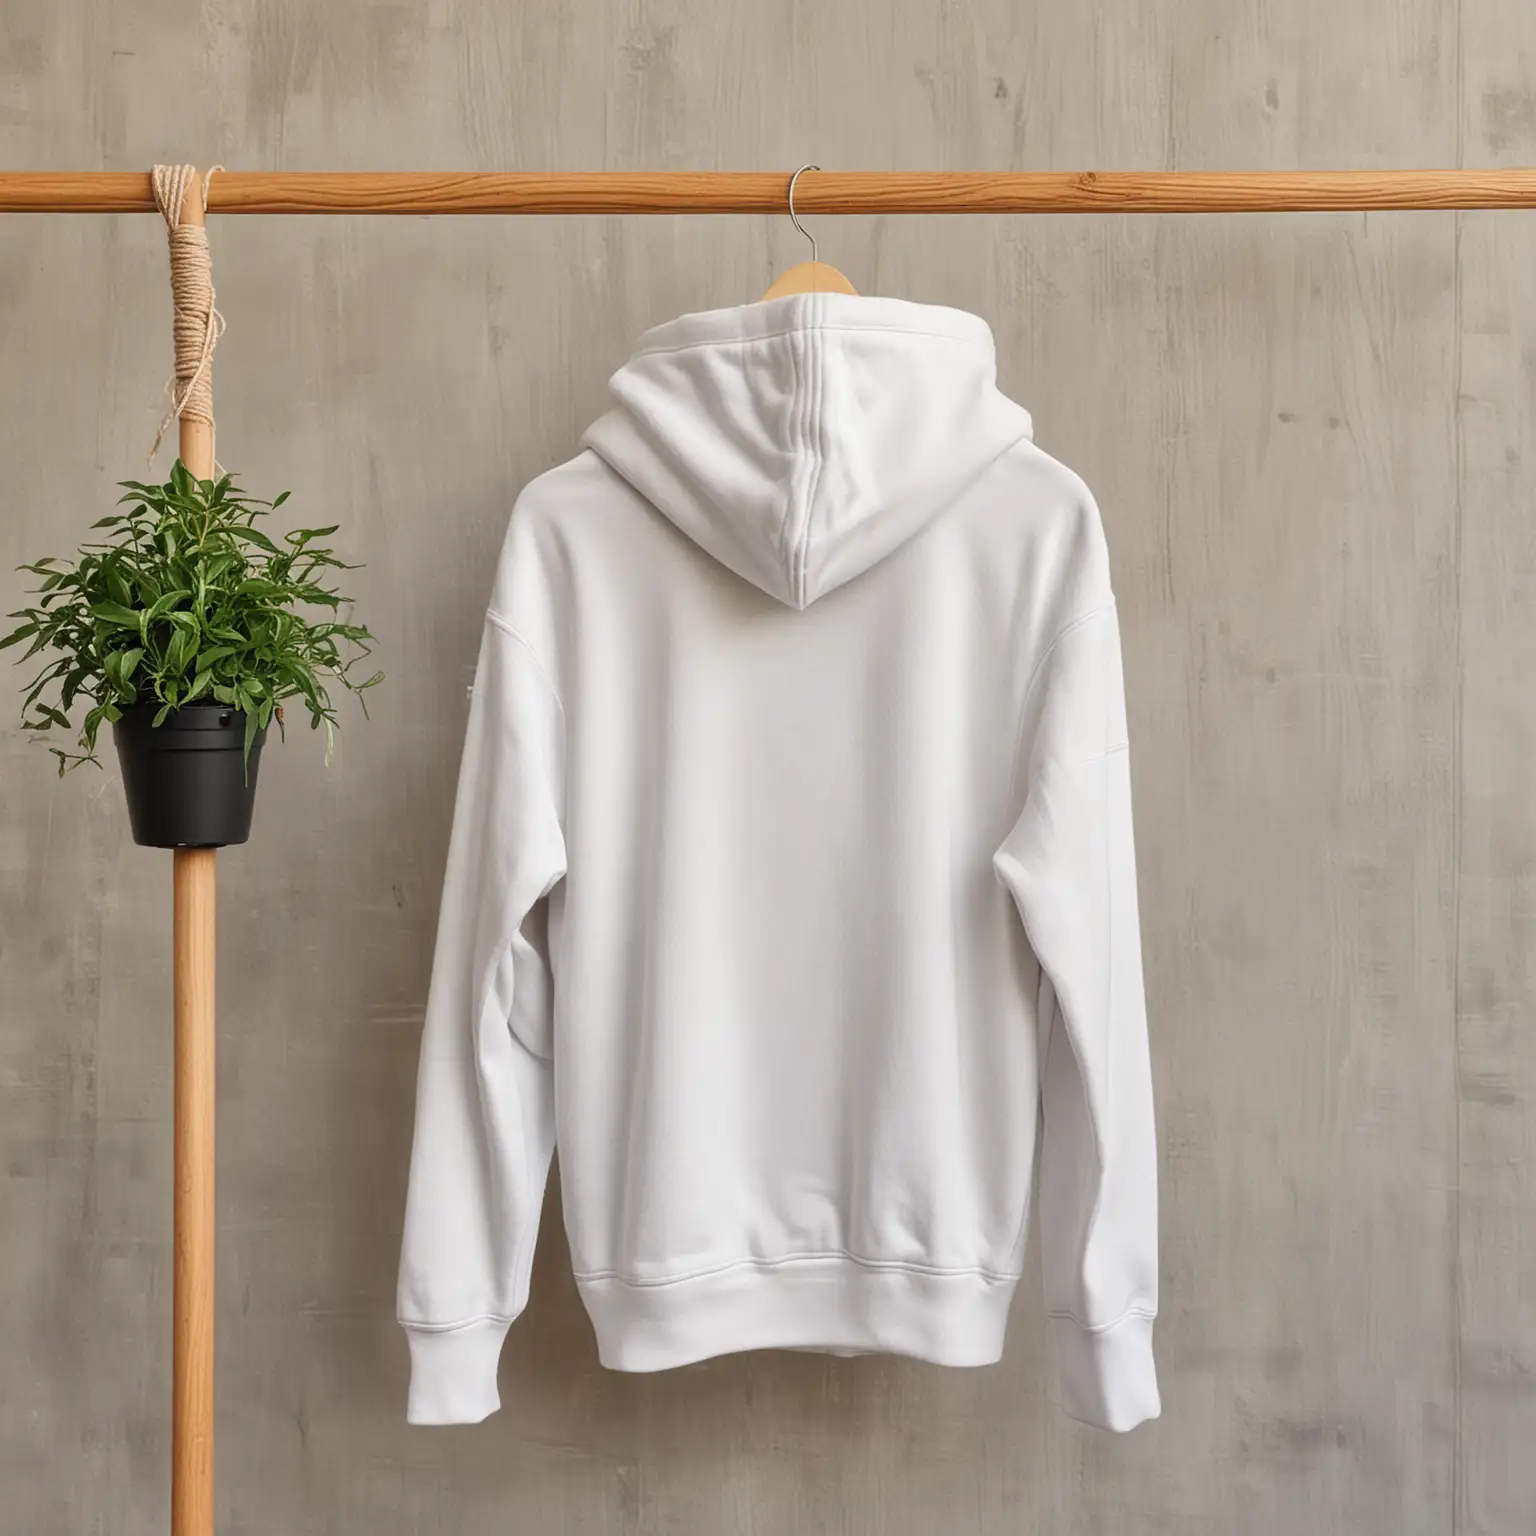 blank back of hoodie on hanger, hanging on wooden pole with small 
plant in background